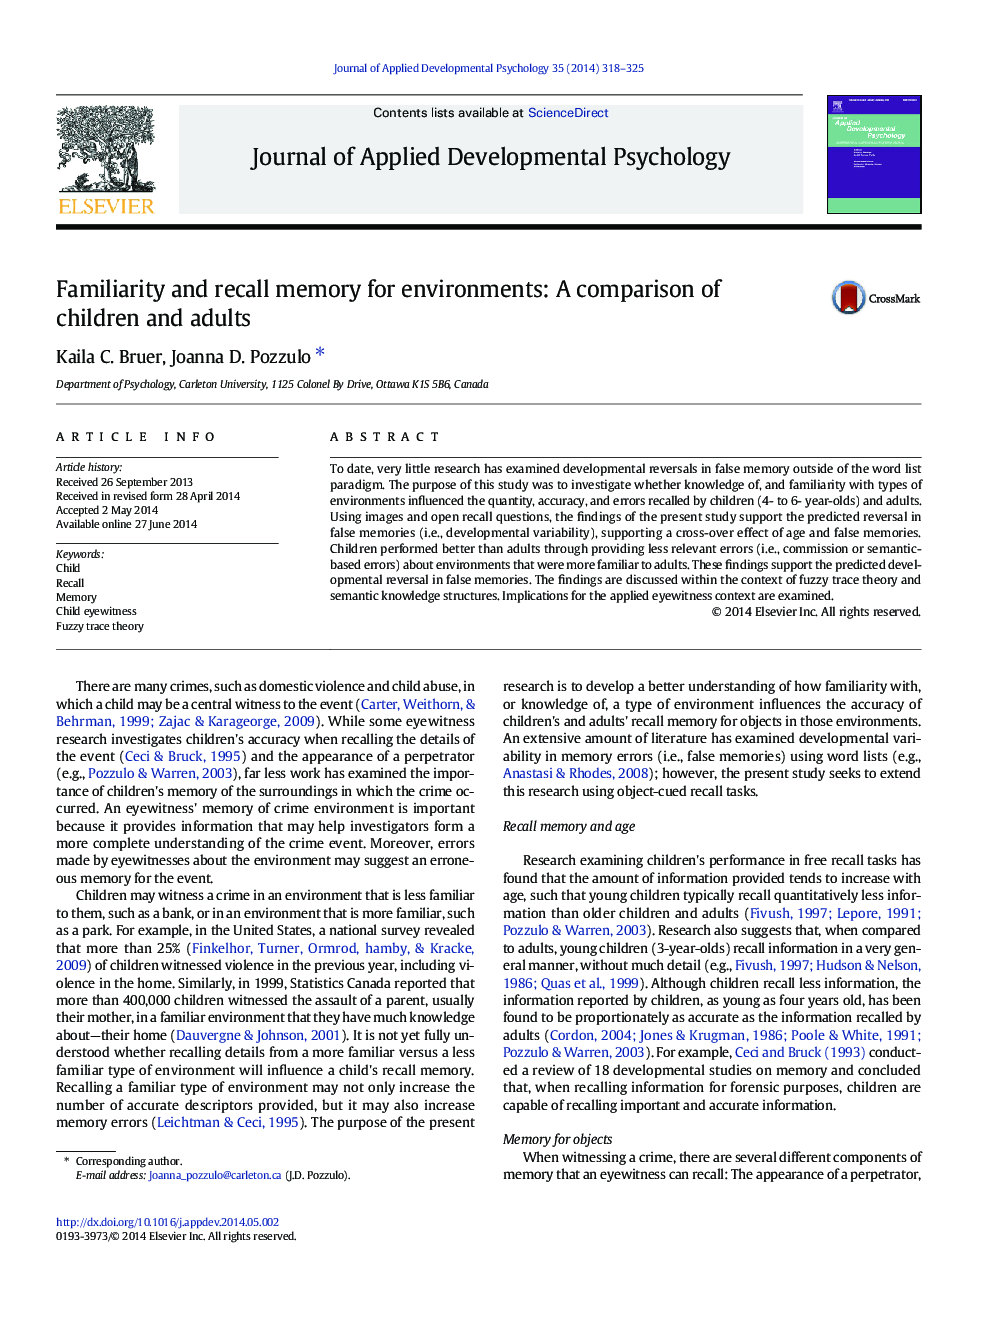 Familiarity and recall memory for environments: A comparison of children and adults